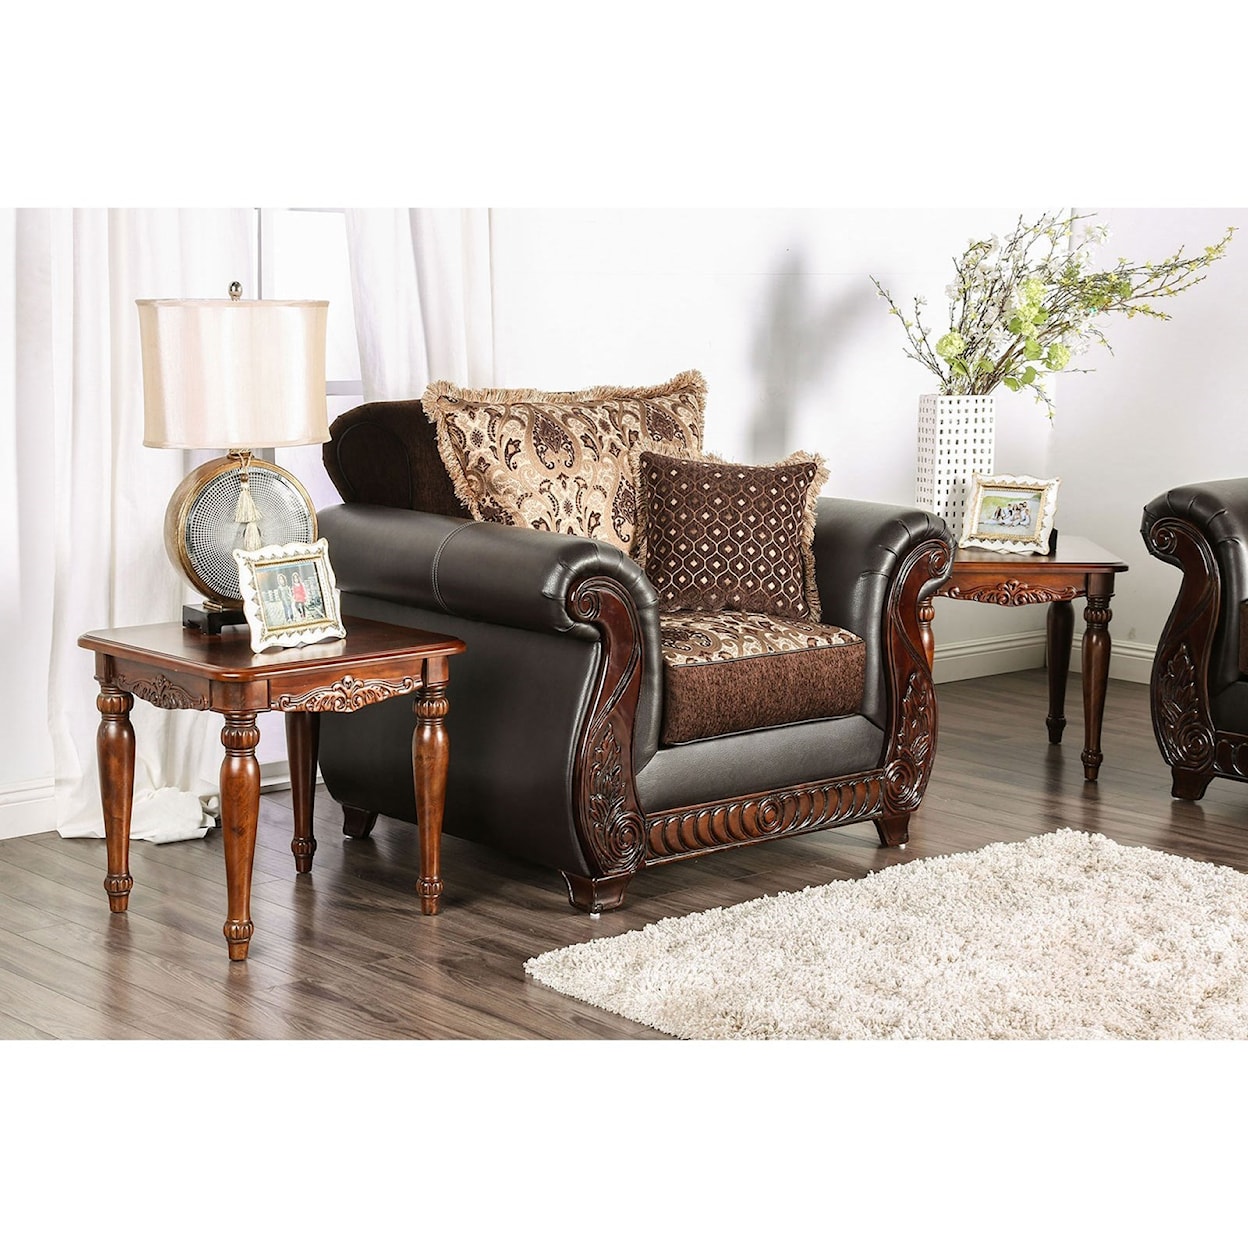 Furniture of America Franklin Chair